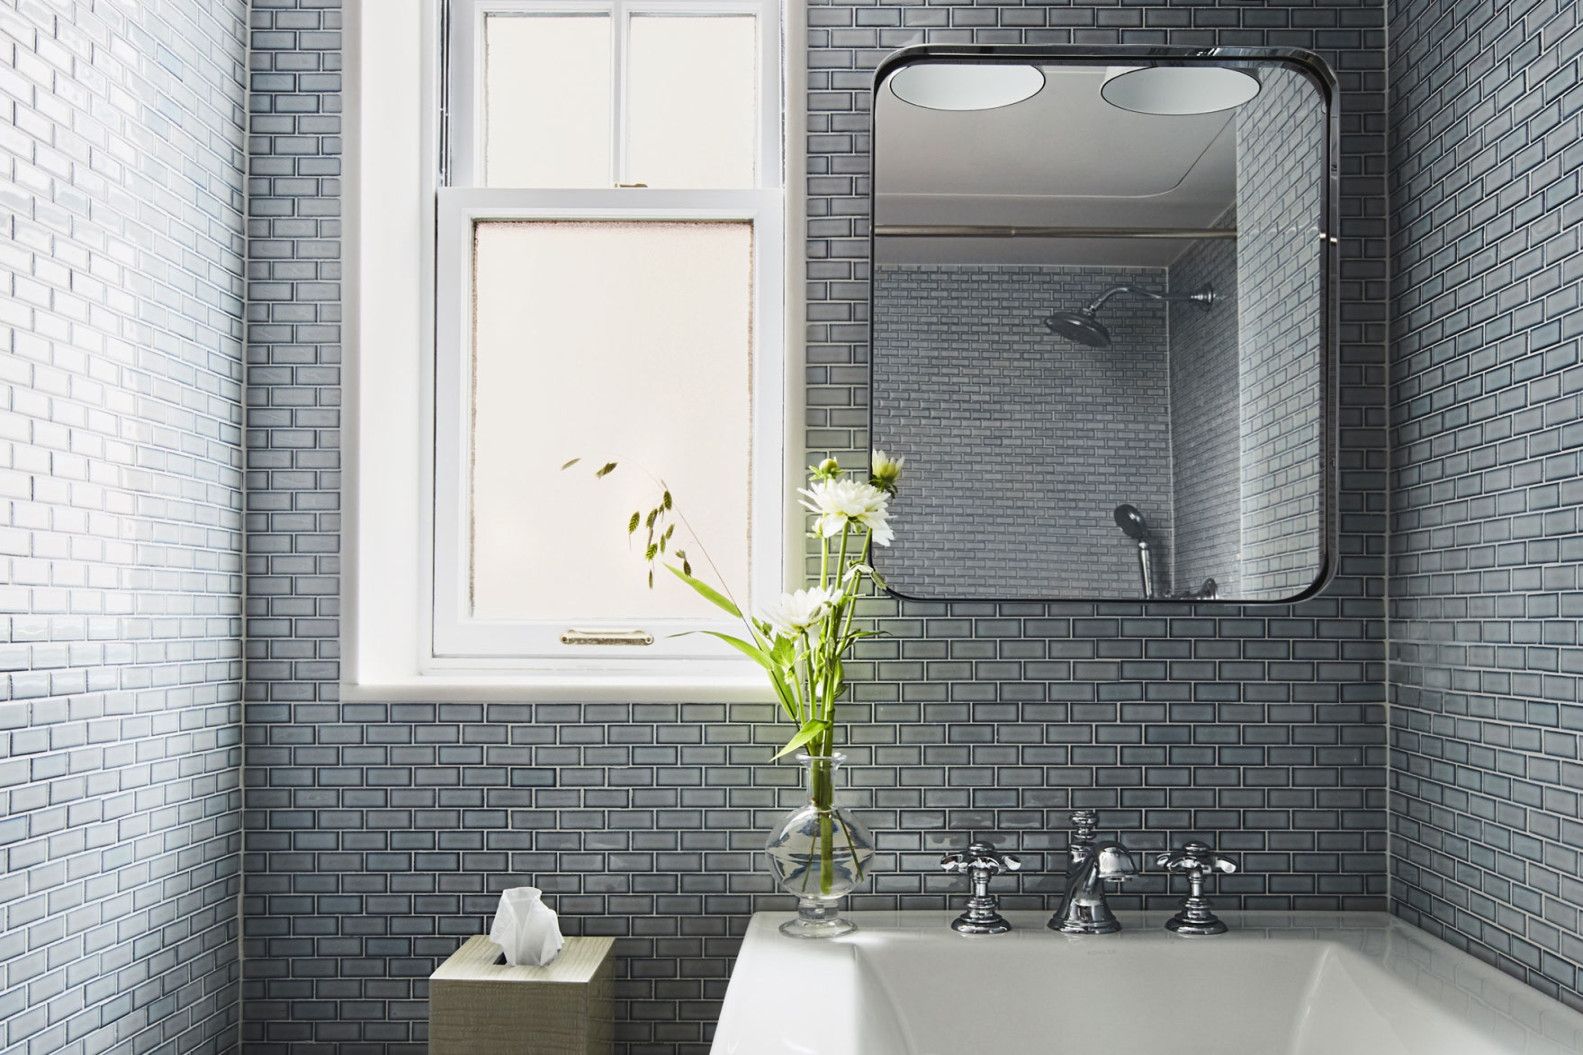 This Bathroom Tile Design Idea Changes Everything  Architectural